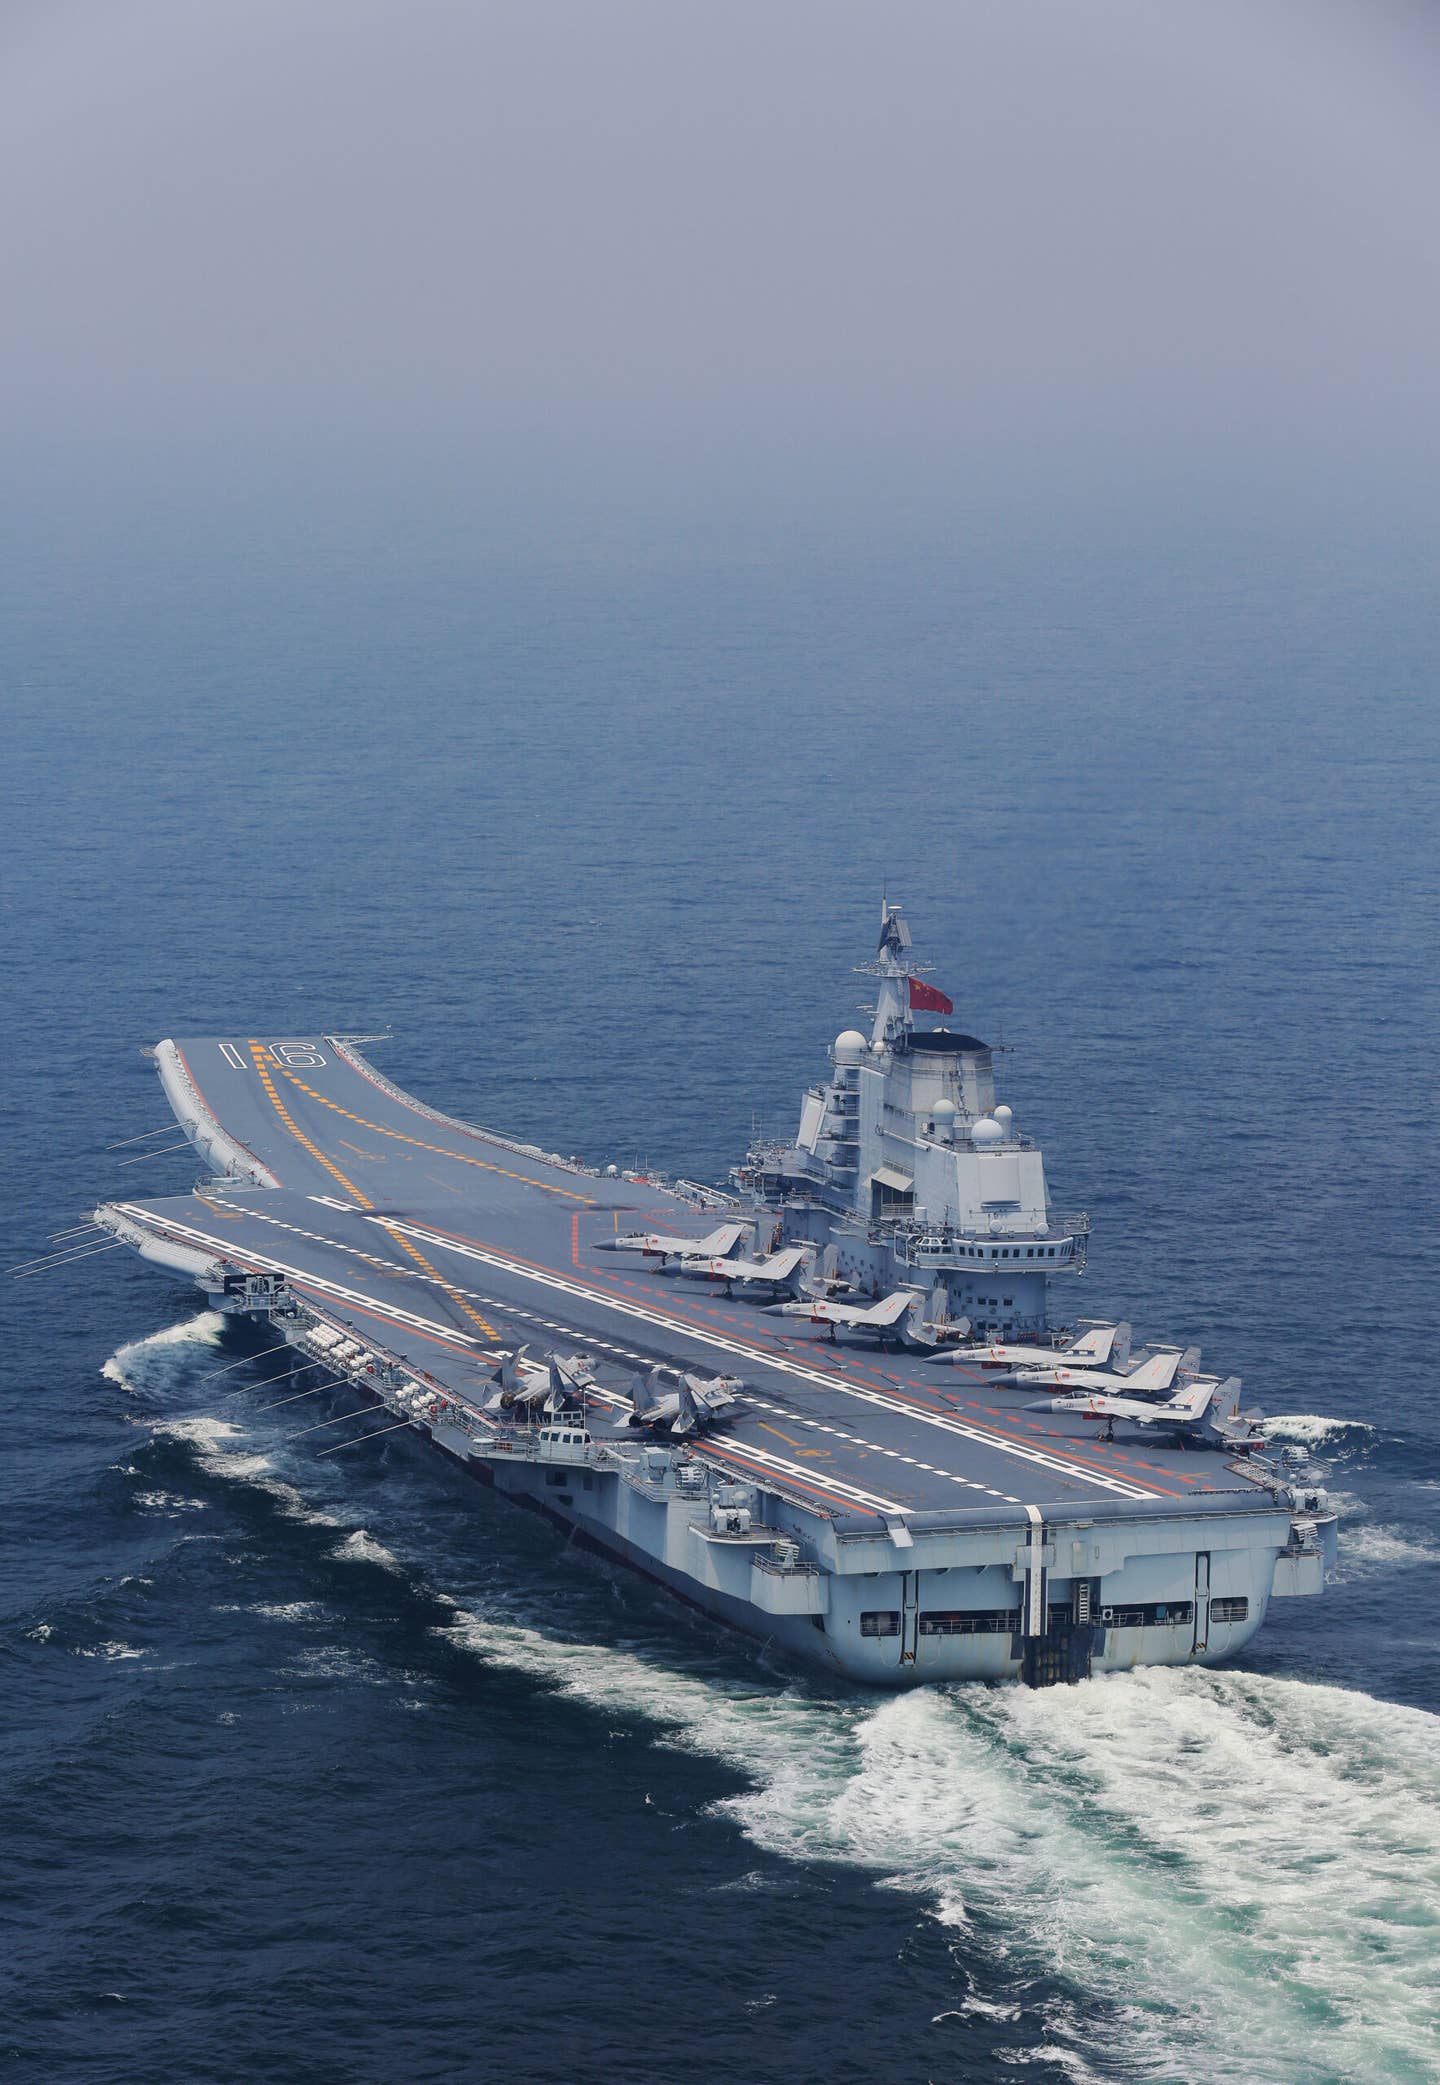 The Chinese aircraft carrier <em>Liaoning</em> during a training mission in 2017. <em>Xinhua/Zeng Tao via Getty Images</em>